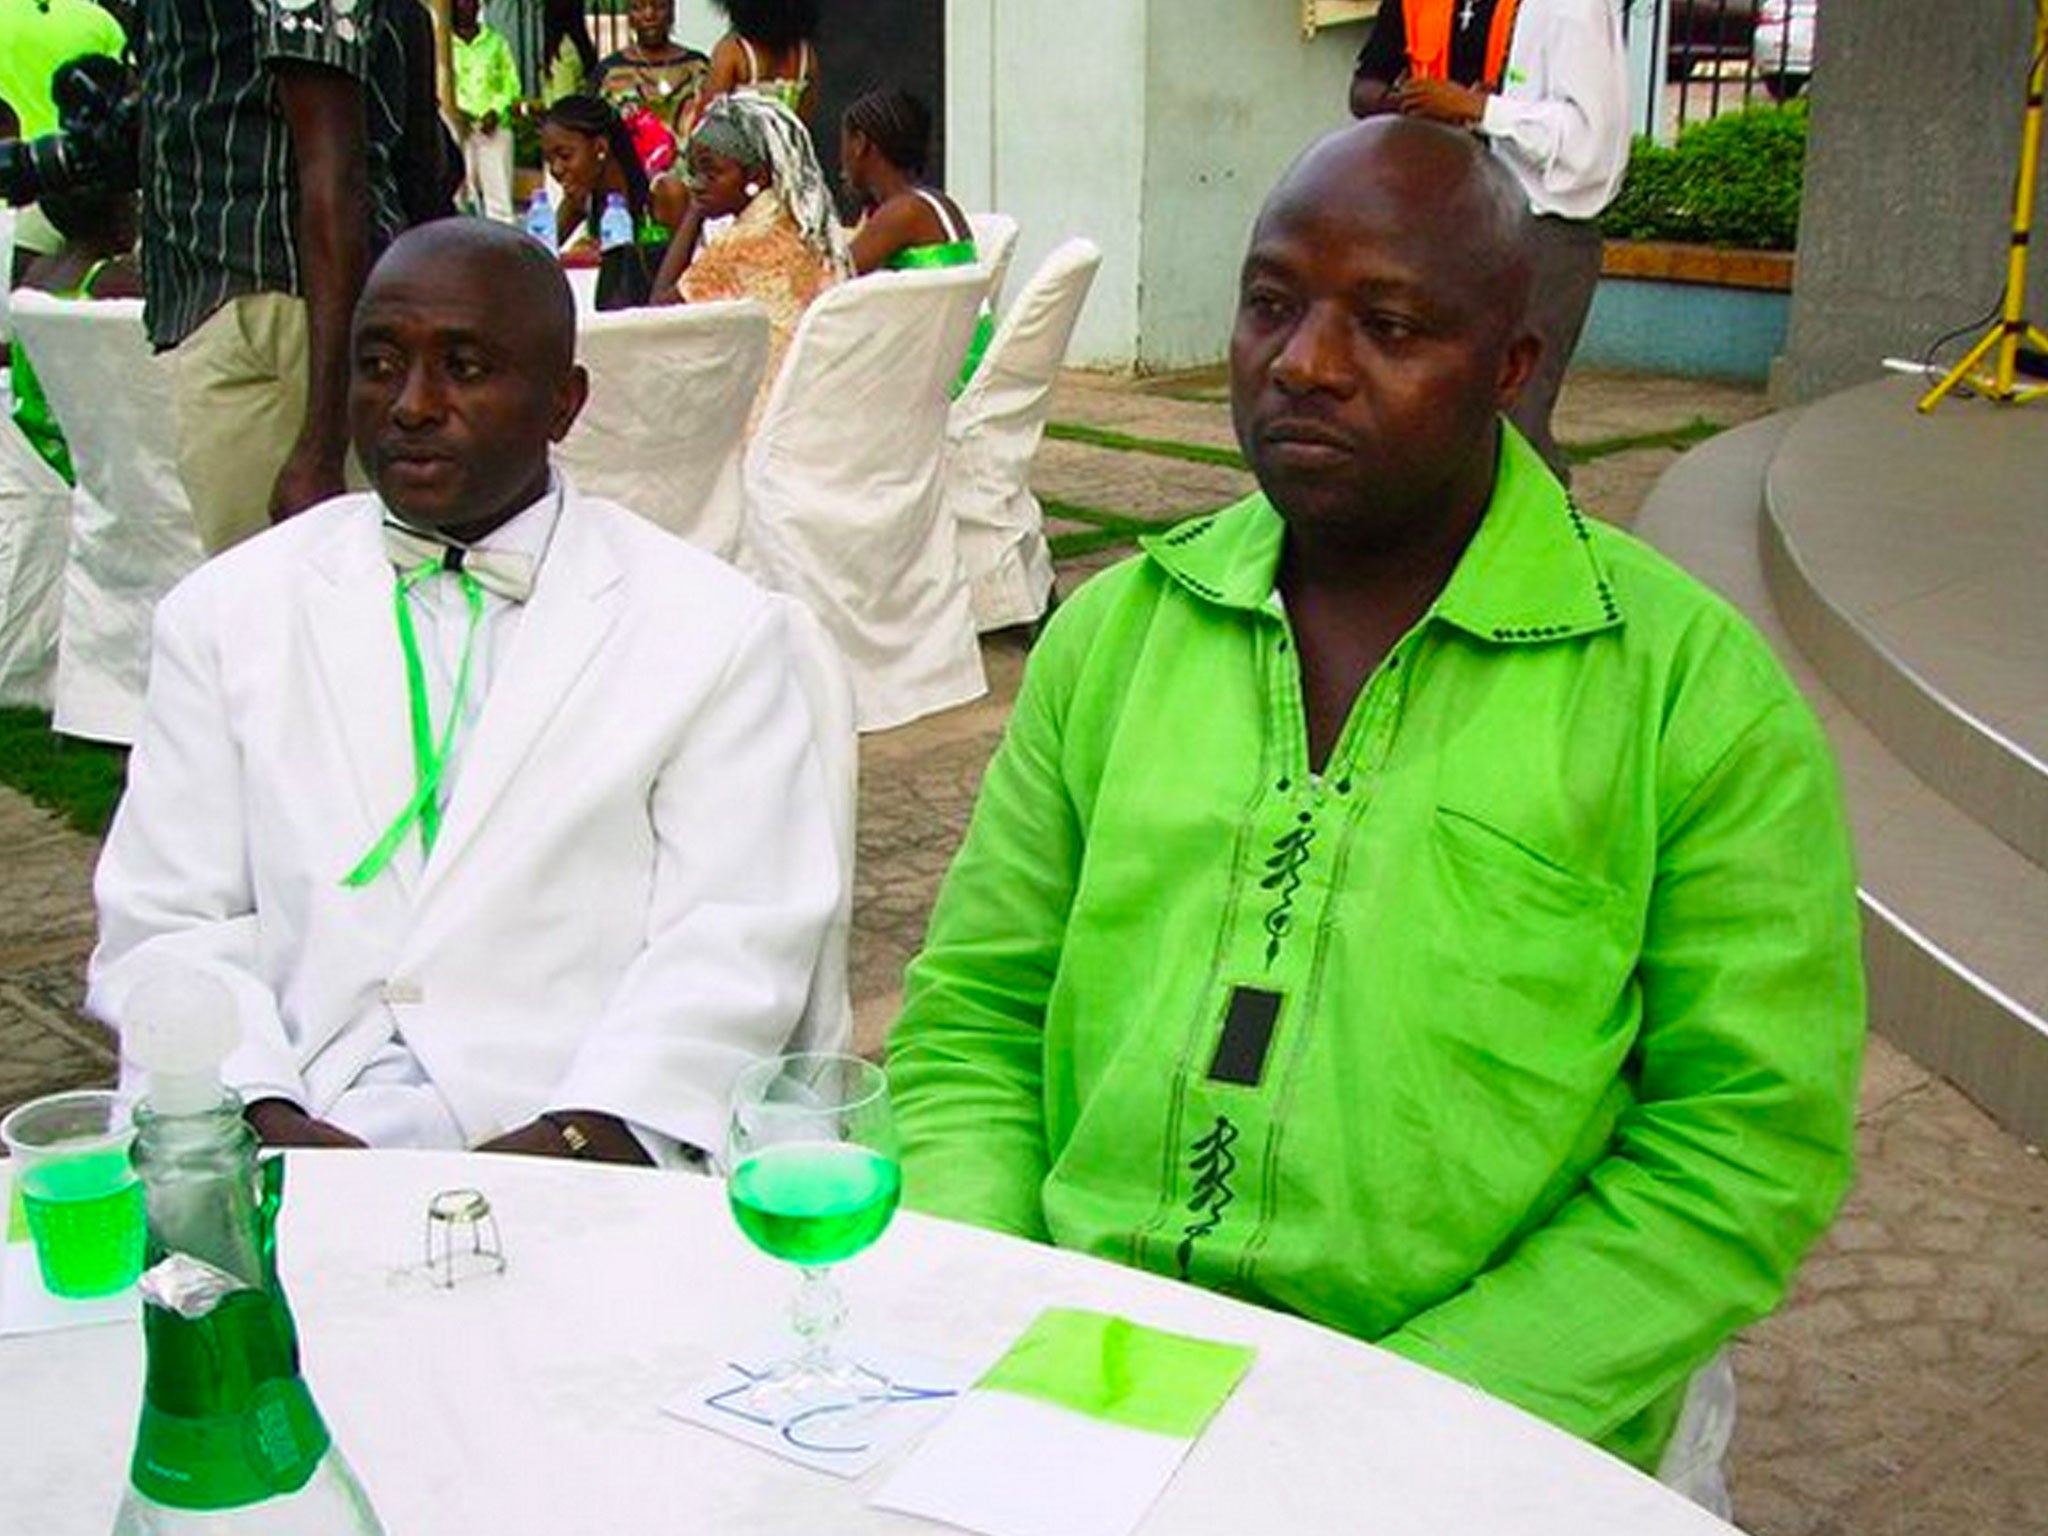 Thomas Eric Duncan, right, with a friend at a wedding in Ghana. Duncan has been kept in isolation at a hospital since Sunday